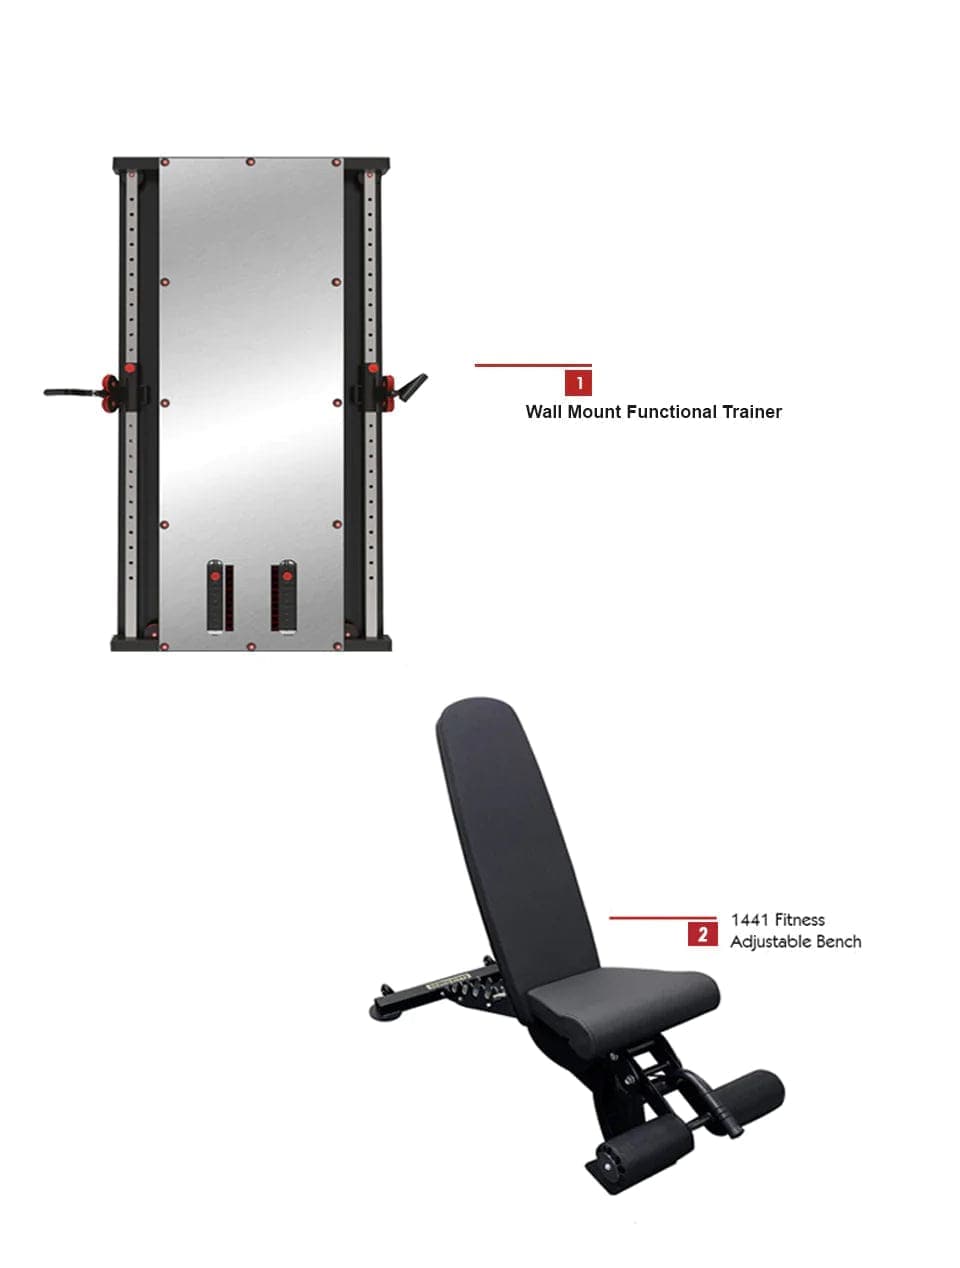 Combo Deal | 1441 Fitness Wall Mounted Mirror Functional Trainer - 41FGT980 + Adjustable Bench A8007 - Athletix.ae